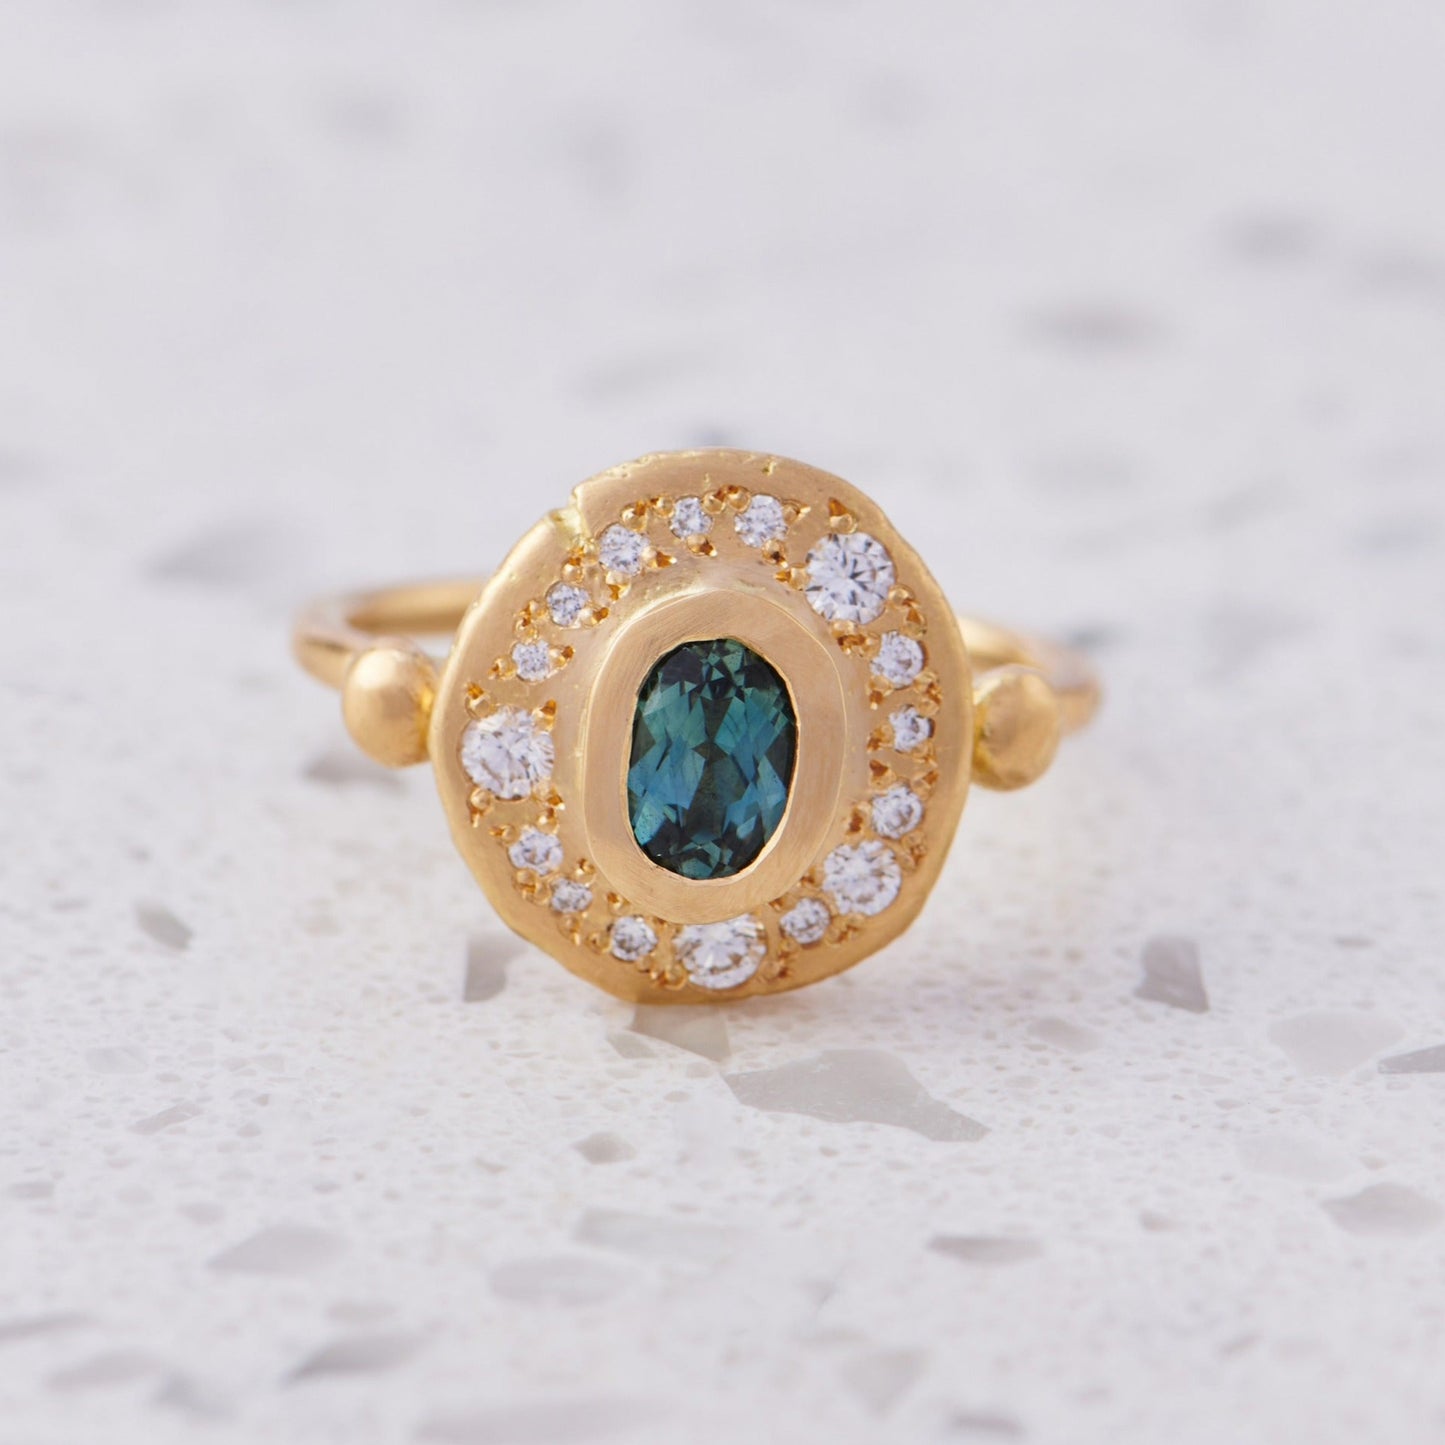 Load image into Gallery viewer, One-off Parti Sapphire Trove Ring in 18ct Yellow Gold, size M and a half (In Stock)
